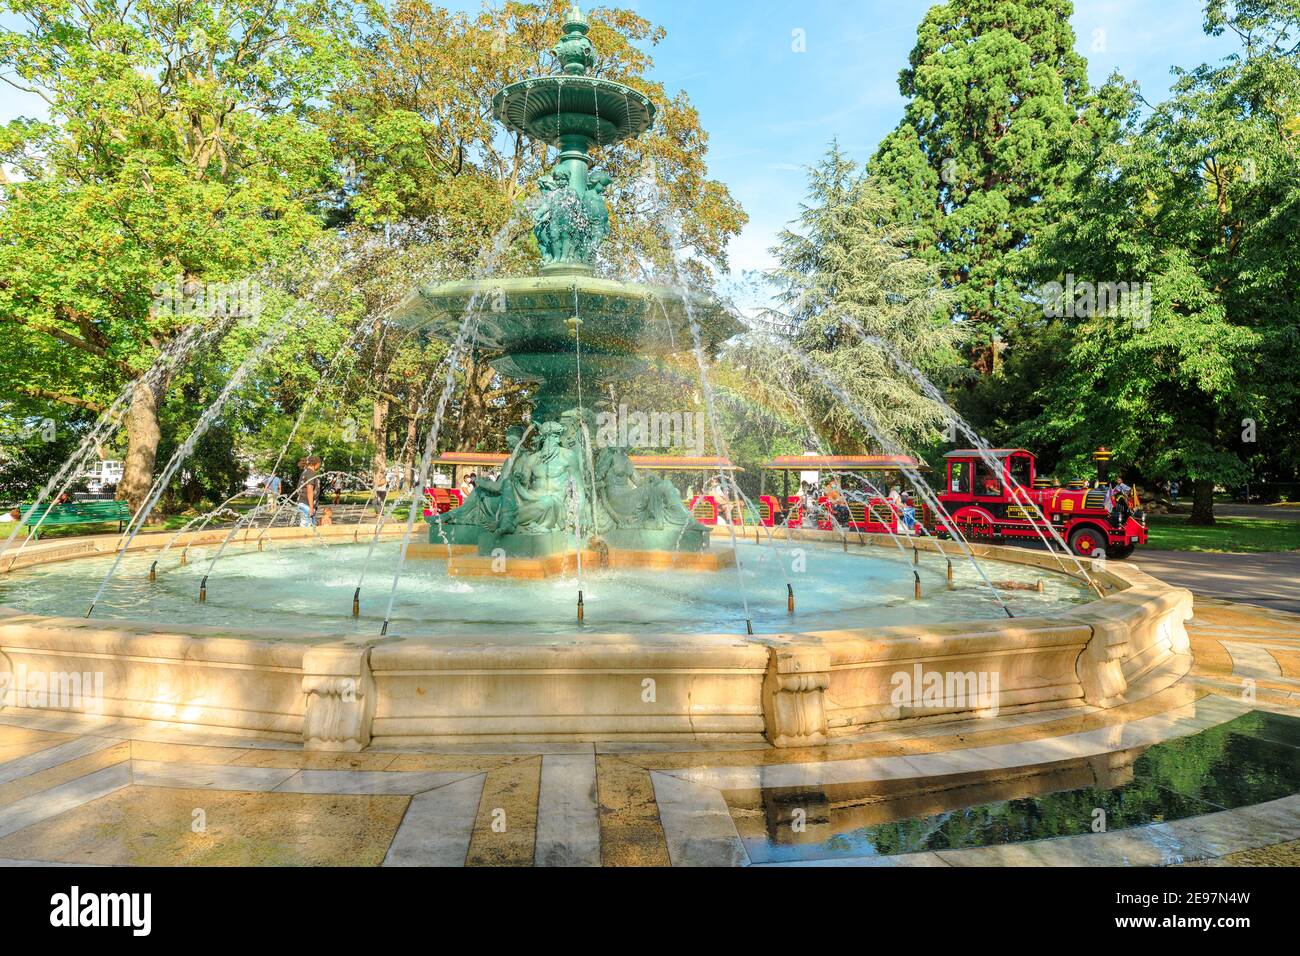 Geneva, Switzerland - Aug 15, 2020: Fountain of Four Seasons in center of Jardin Anglais with Red tourist train with carriages and locomotive along Stock Photo